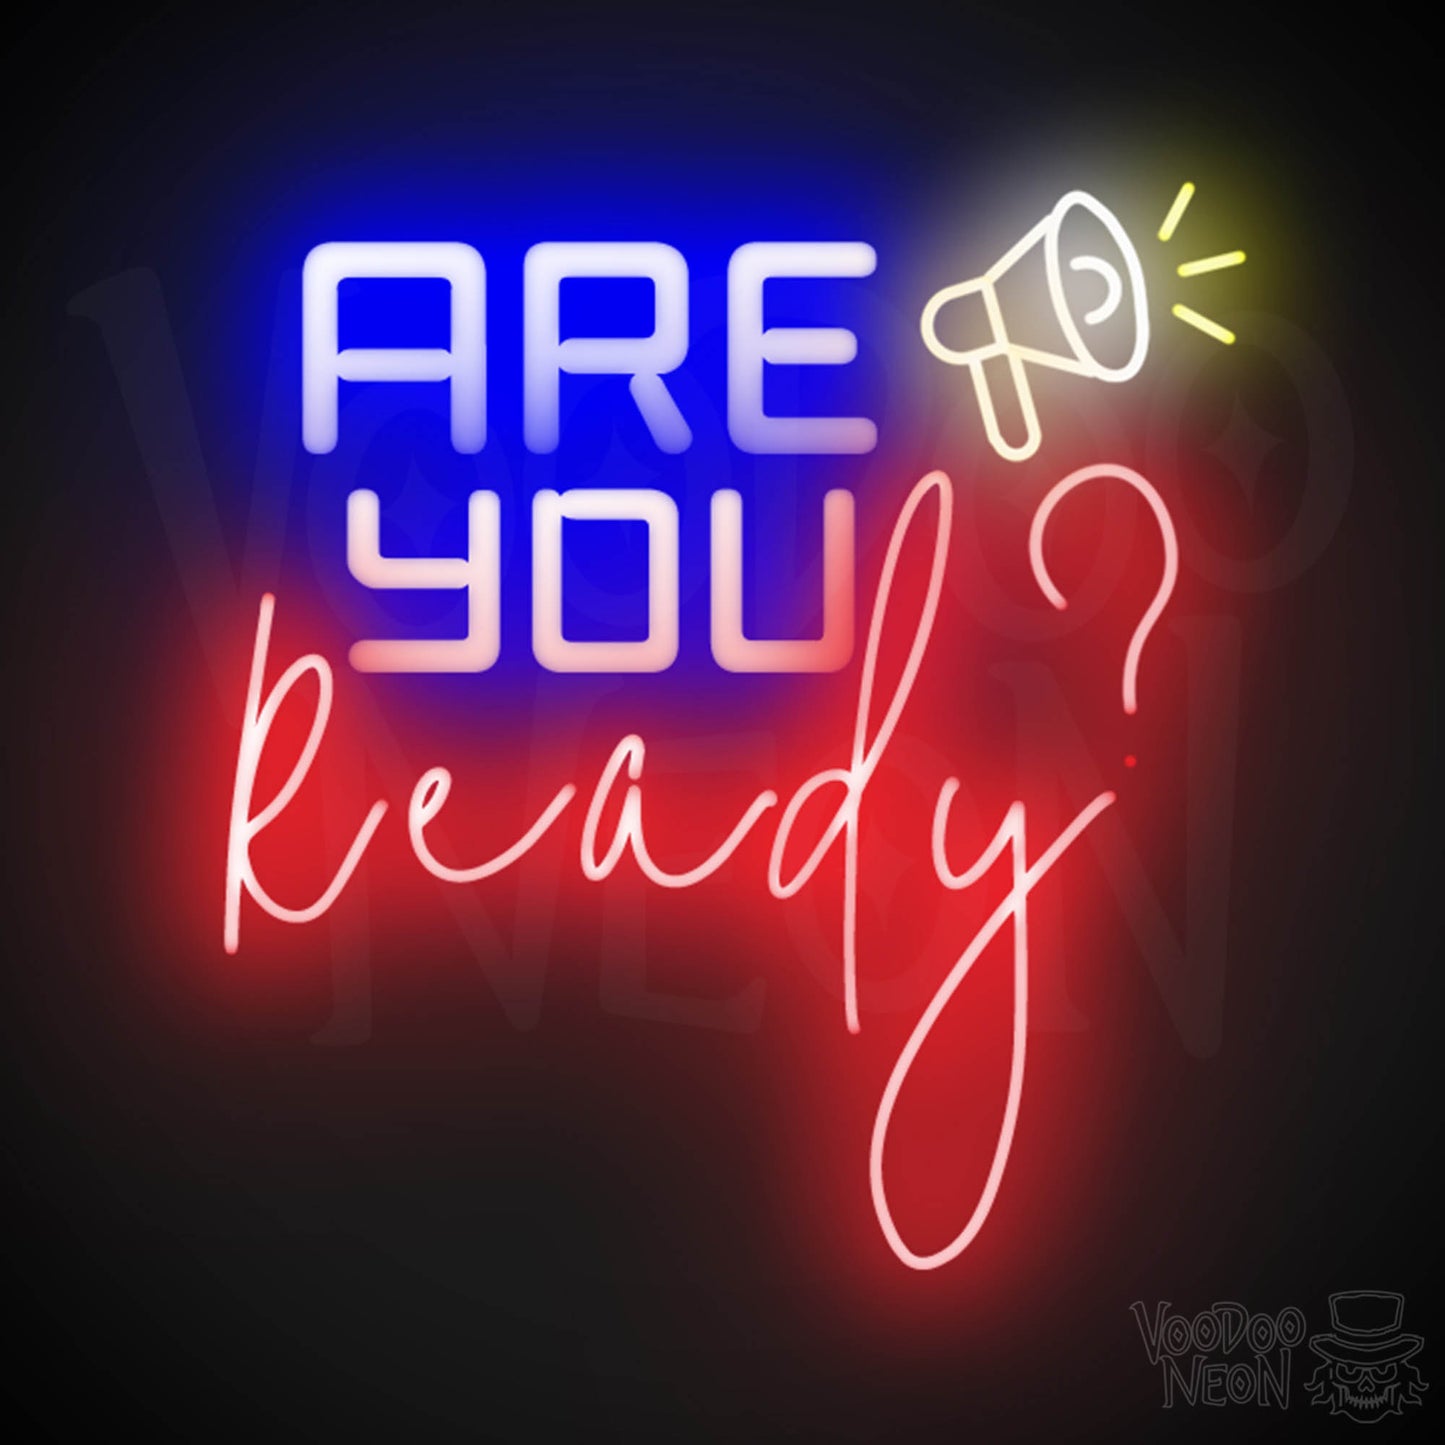 Are You Ready Neon Sign - Neon Are You Ready Sign - LED Wall Art - Color Multi-Color